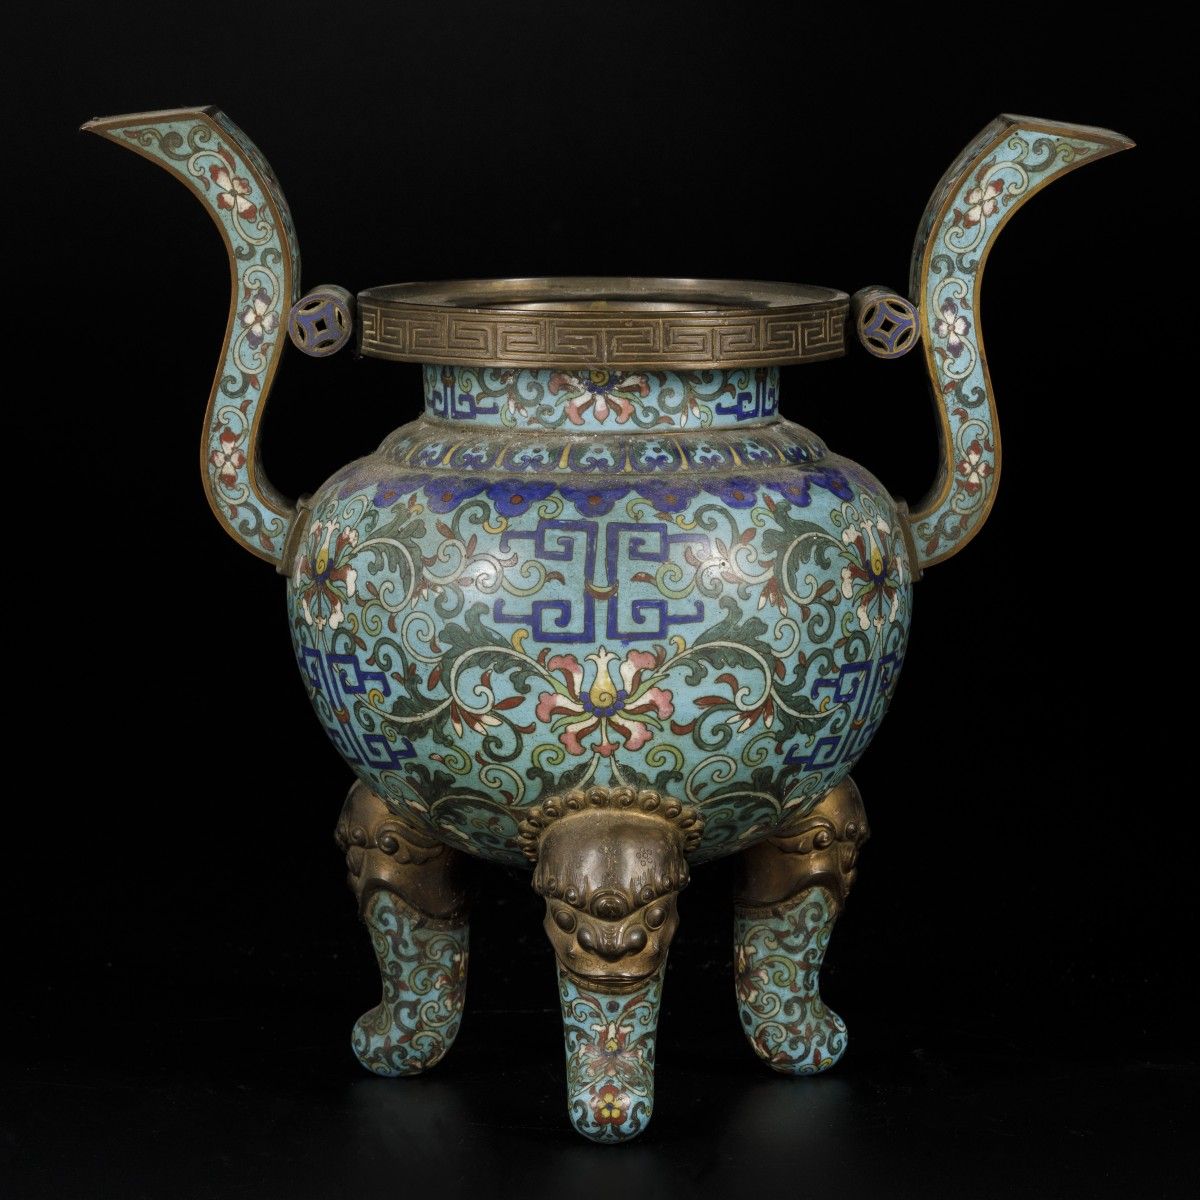 A cloisonne incense burner, China, 18/19th century. Lid is missing. 30 x 32 cm. &hellip;